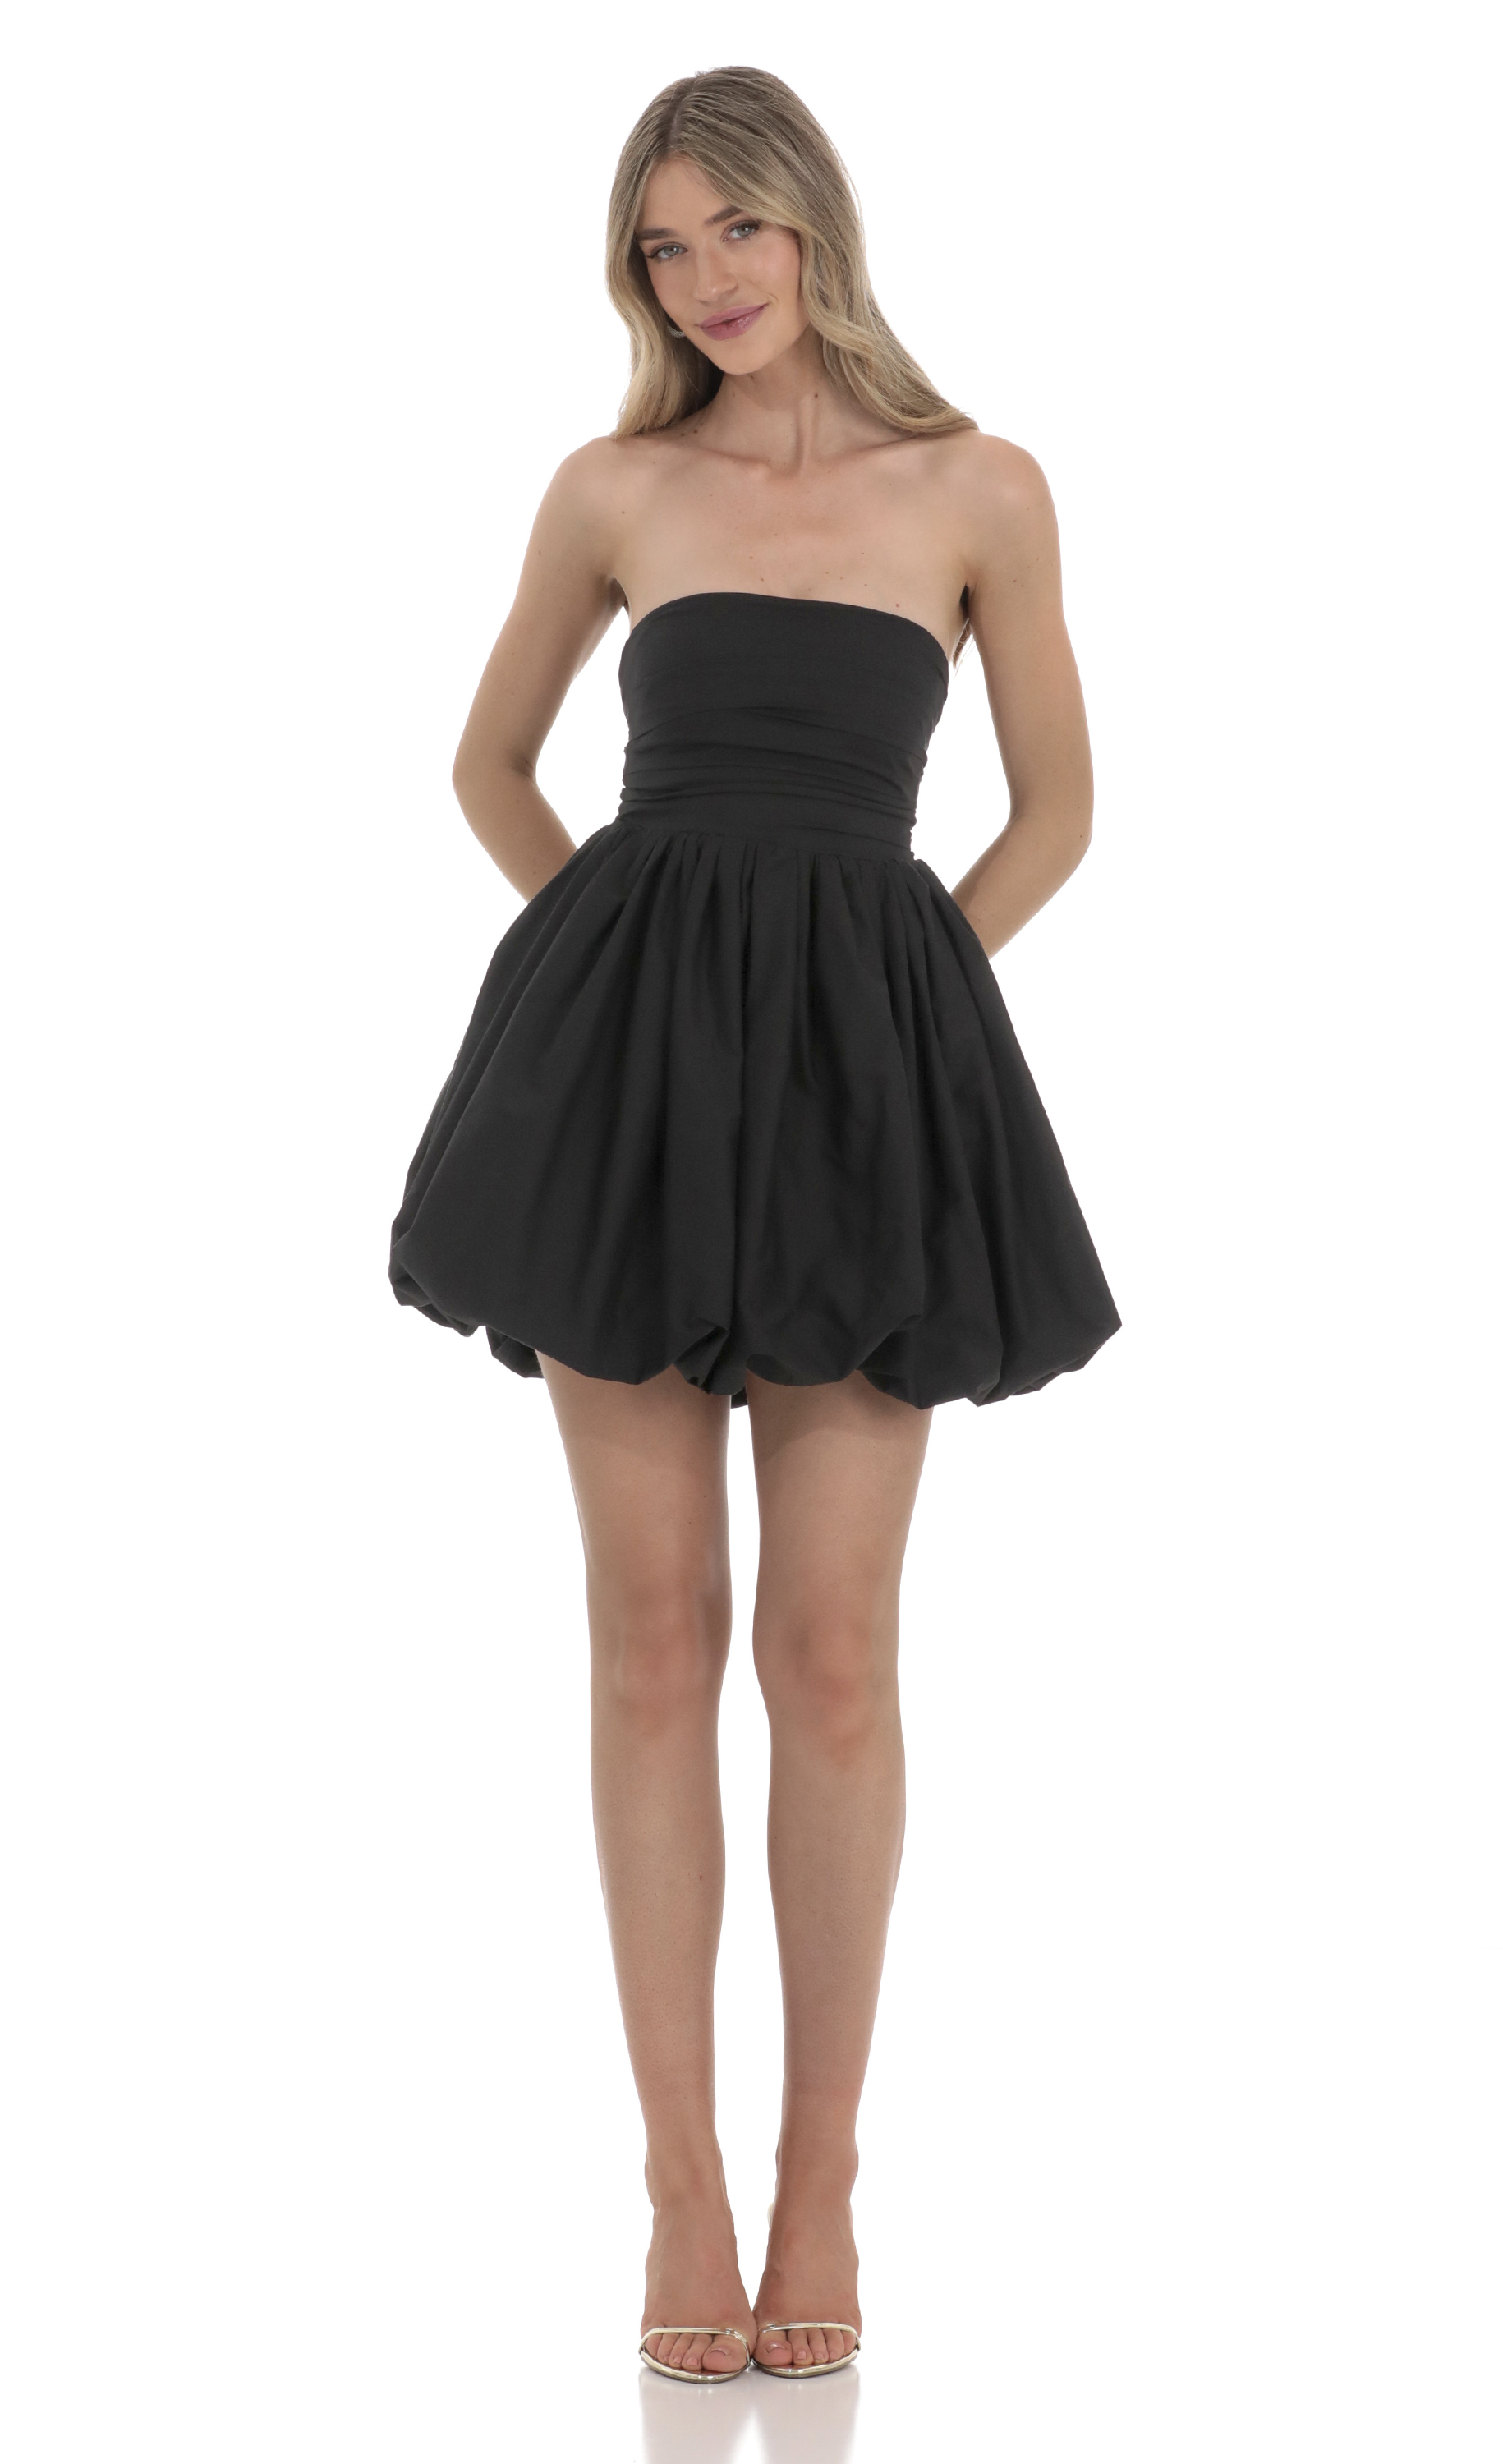 Strapless Bubble Puff Dress in Black